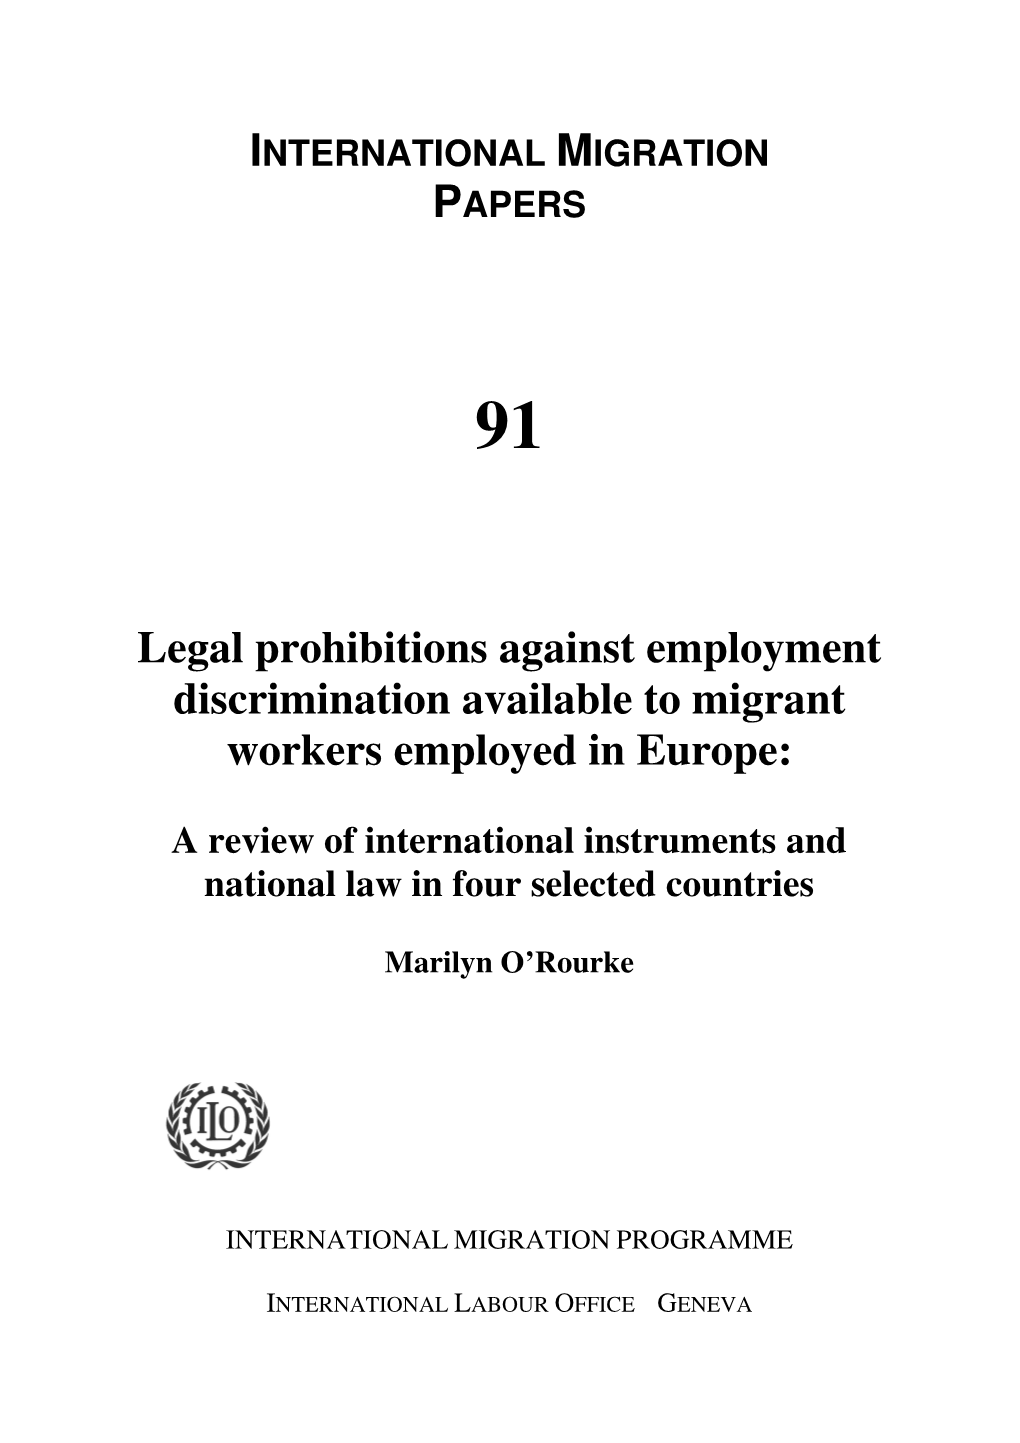 Legal Prohibitions Against Employment Discrimination Available to Migrant Workers Employed in Europe